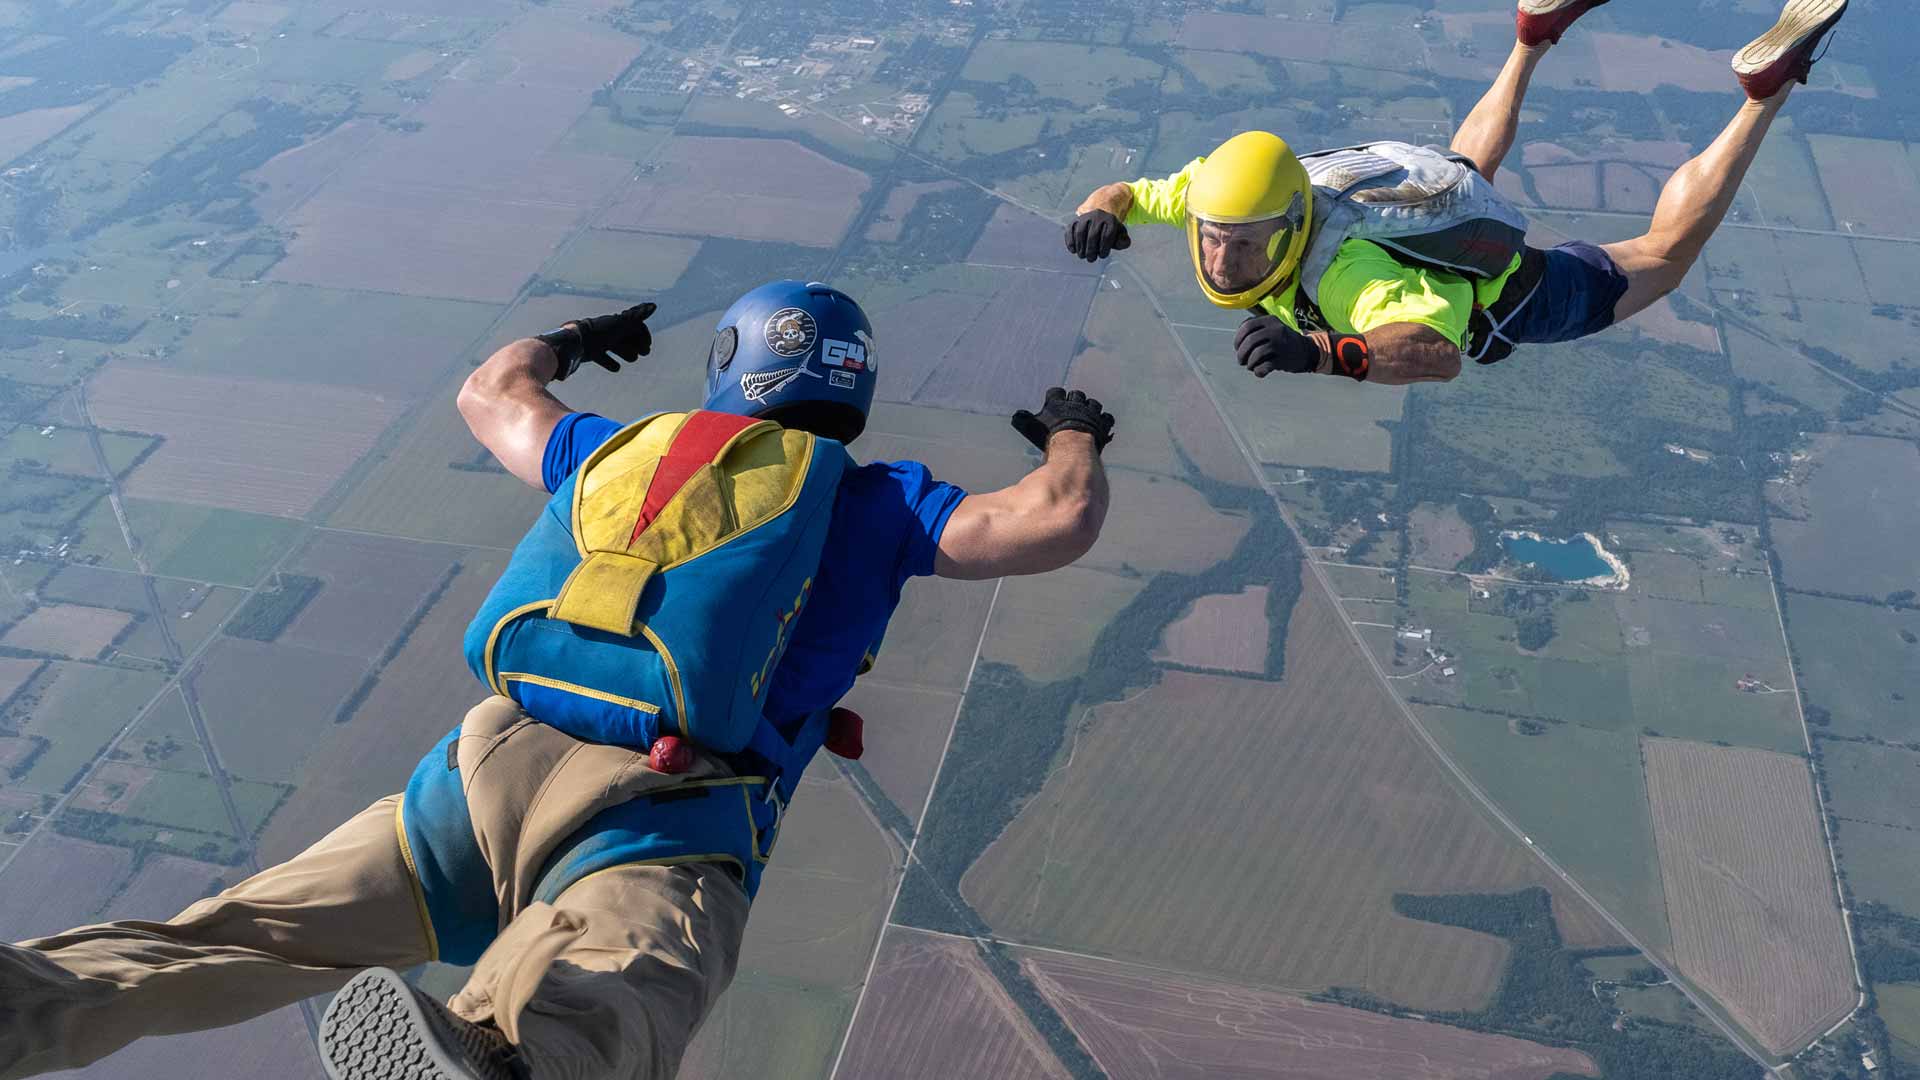 James Thornton and Ian Wisecarver skydive